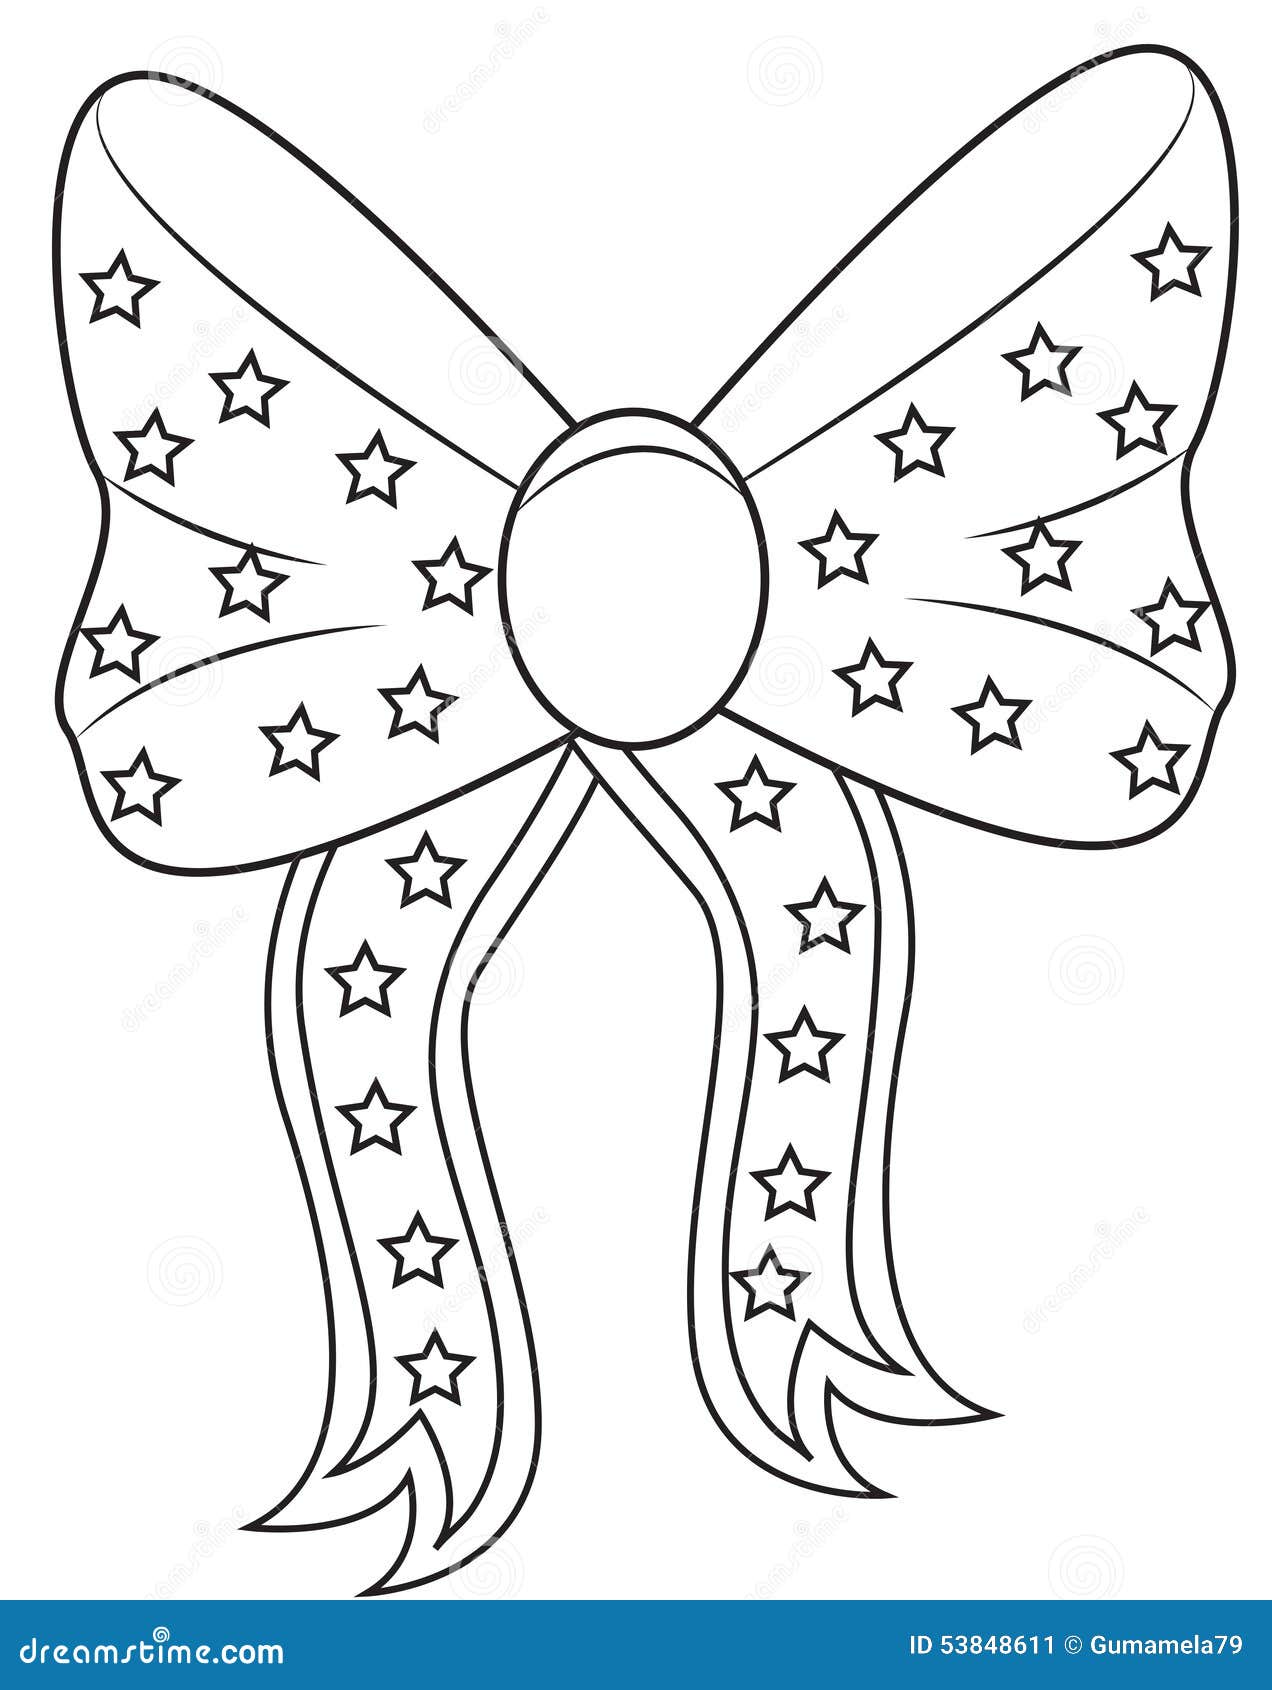 Ribbon coloring page stock illustration illustration of book